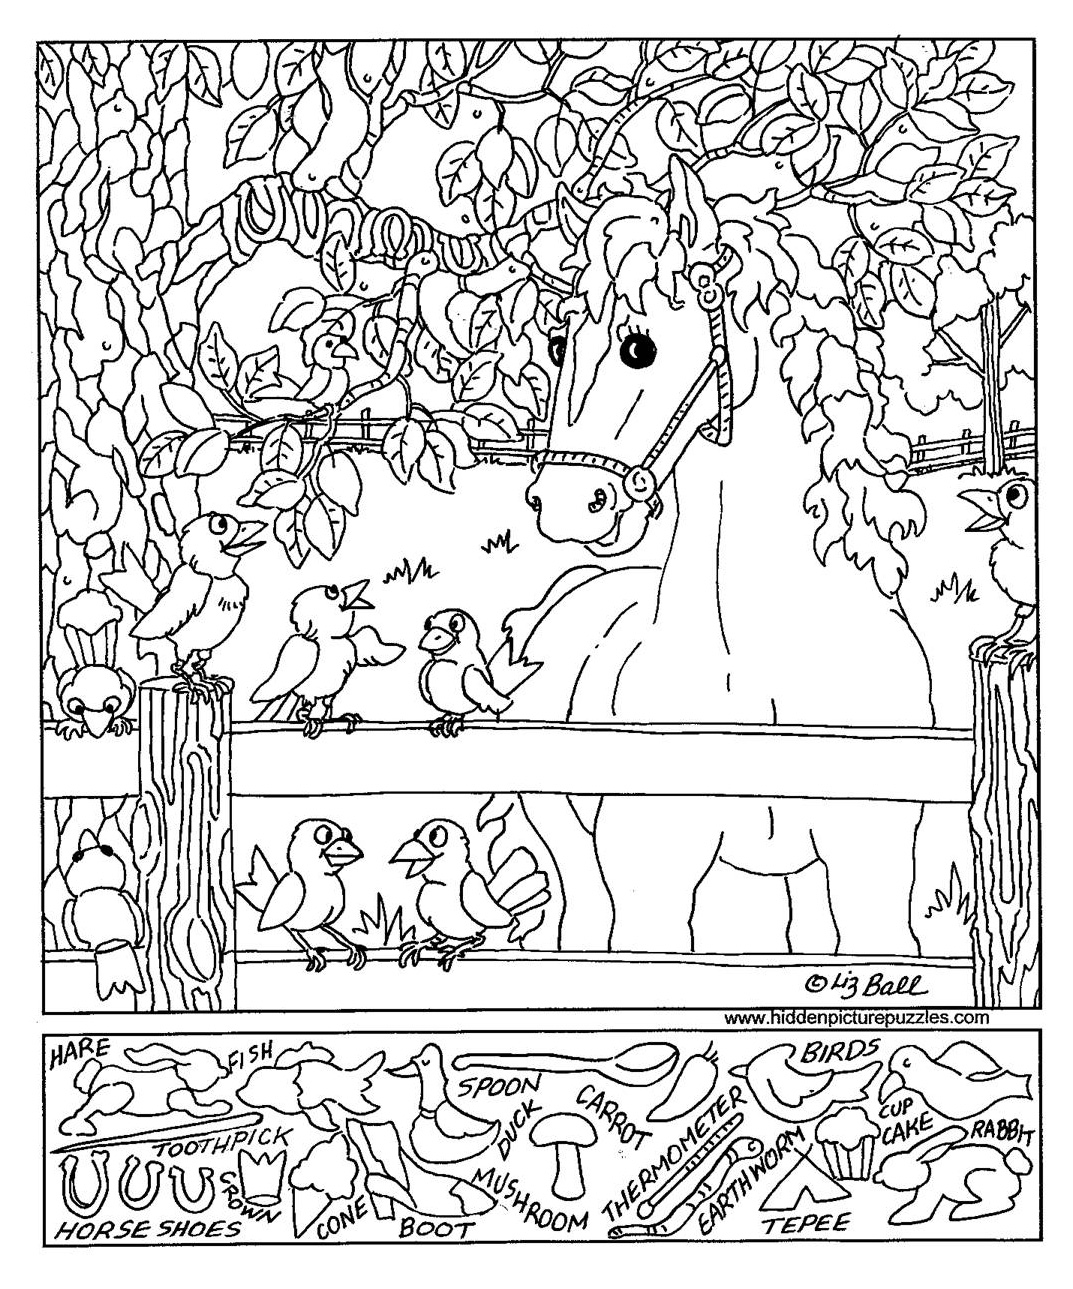 object search coloring pages and find objects - photo #14